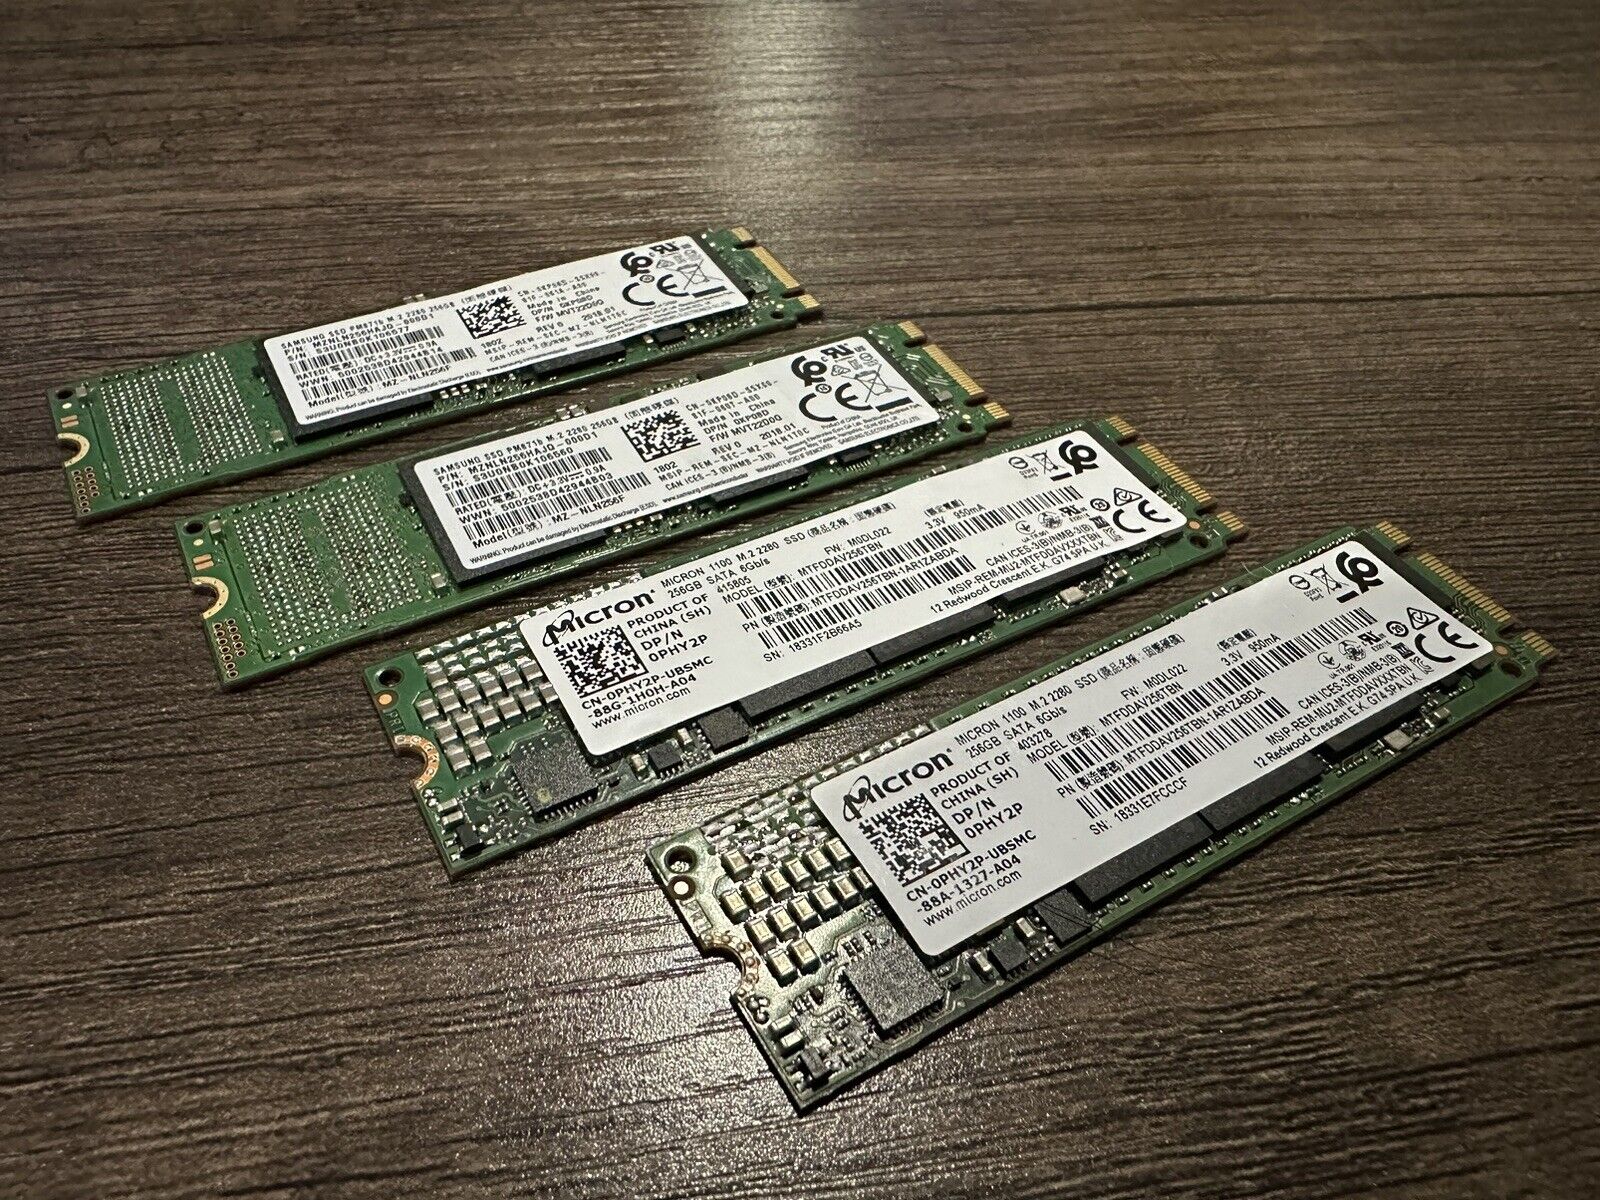 MICRON & SAMSUNG 256GB M.2 2280 PCIe SSD Solid State Drives (Set of 4)